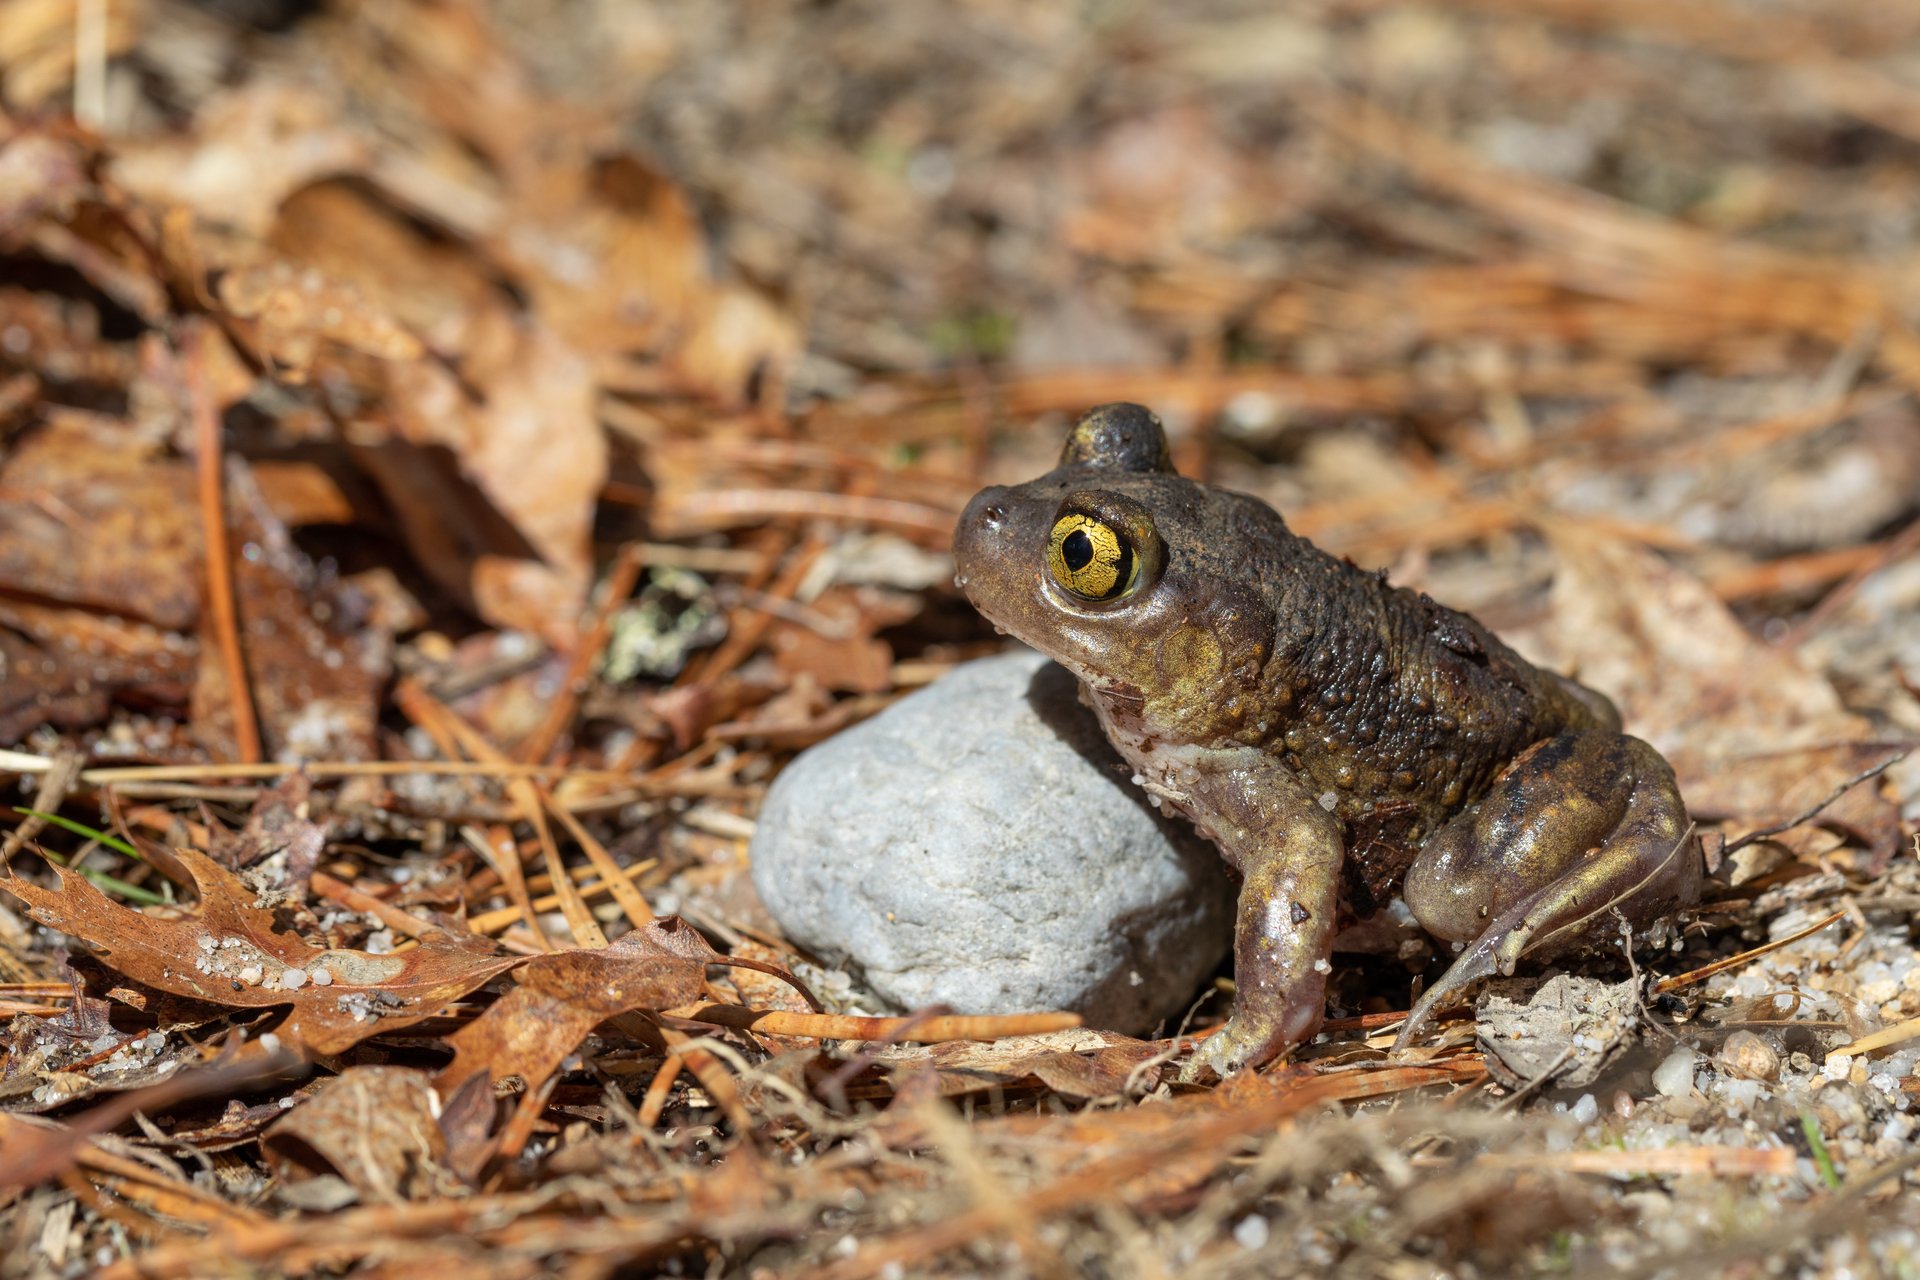 A brown toad with bright yellow eyes leans against a small rock.